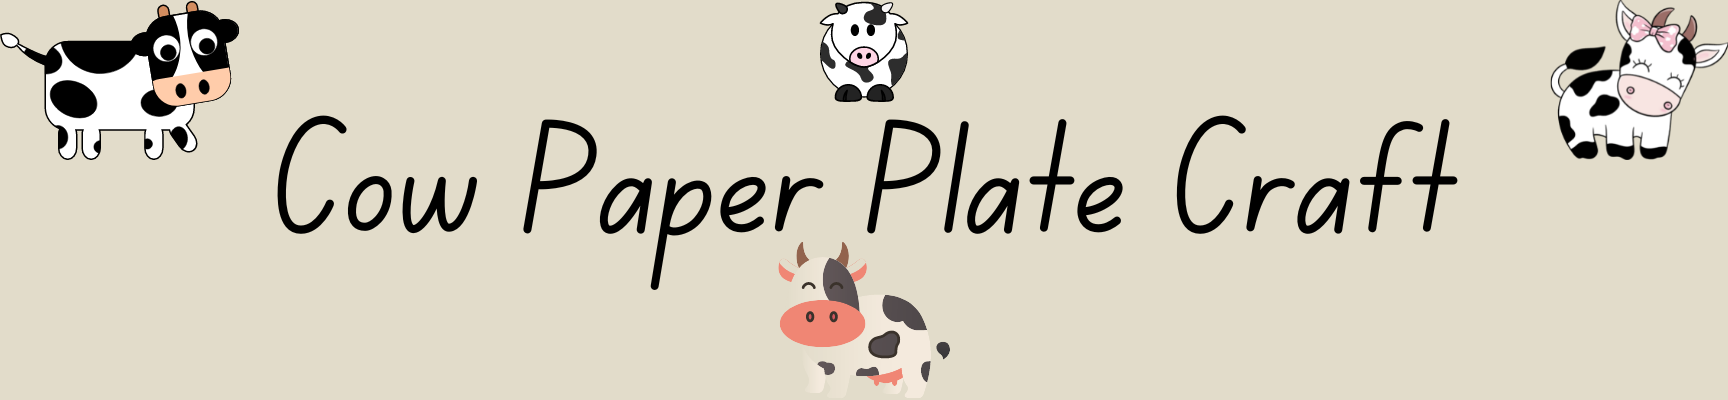 How to Create a Cow Paper Plate Craft with Free Cow Template